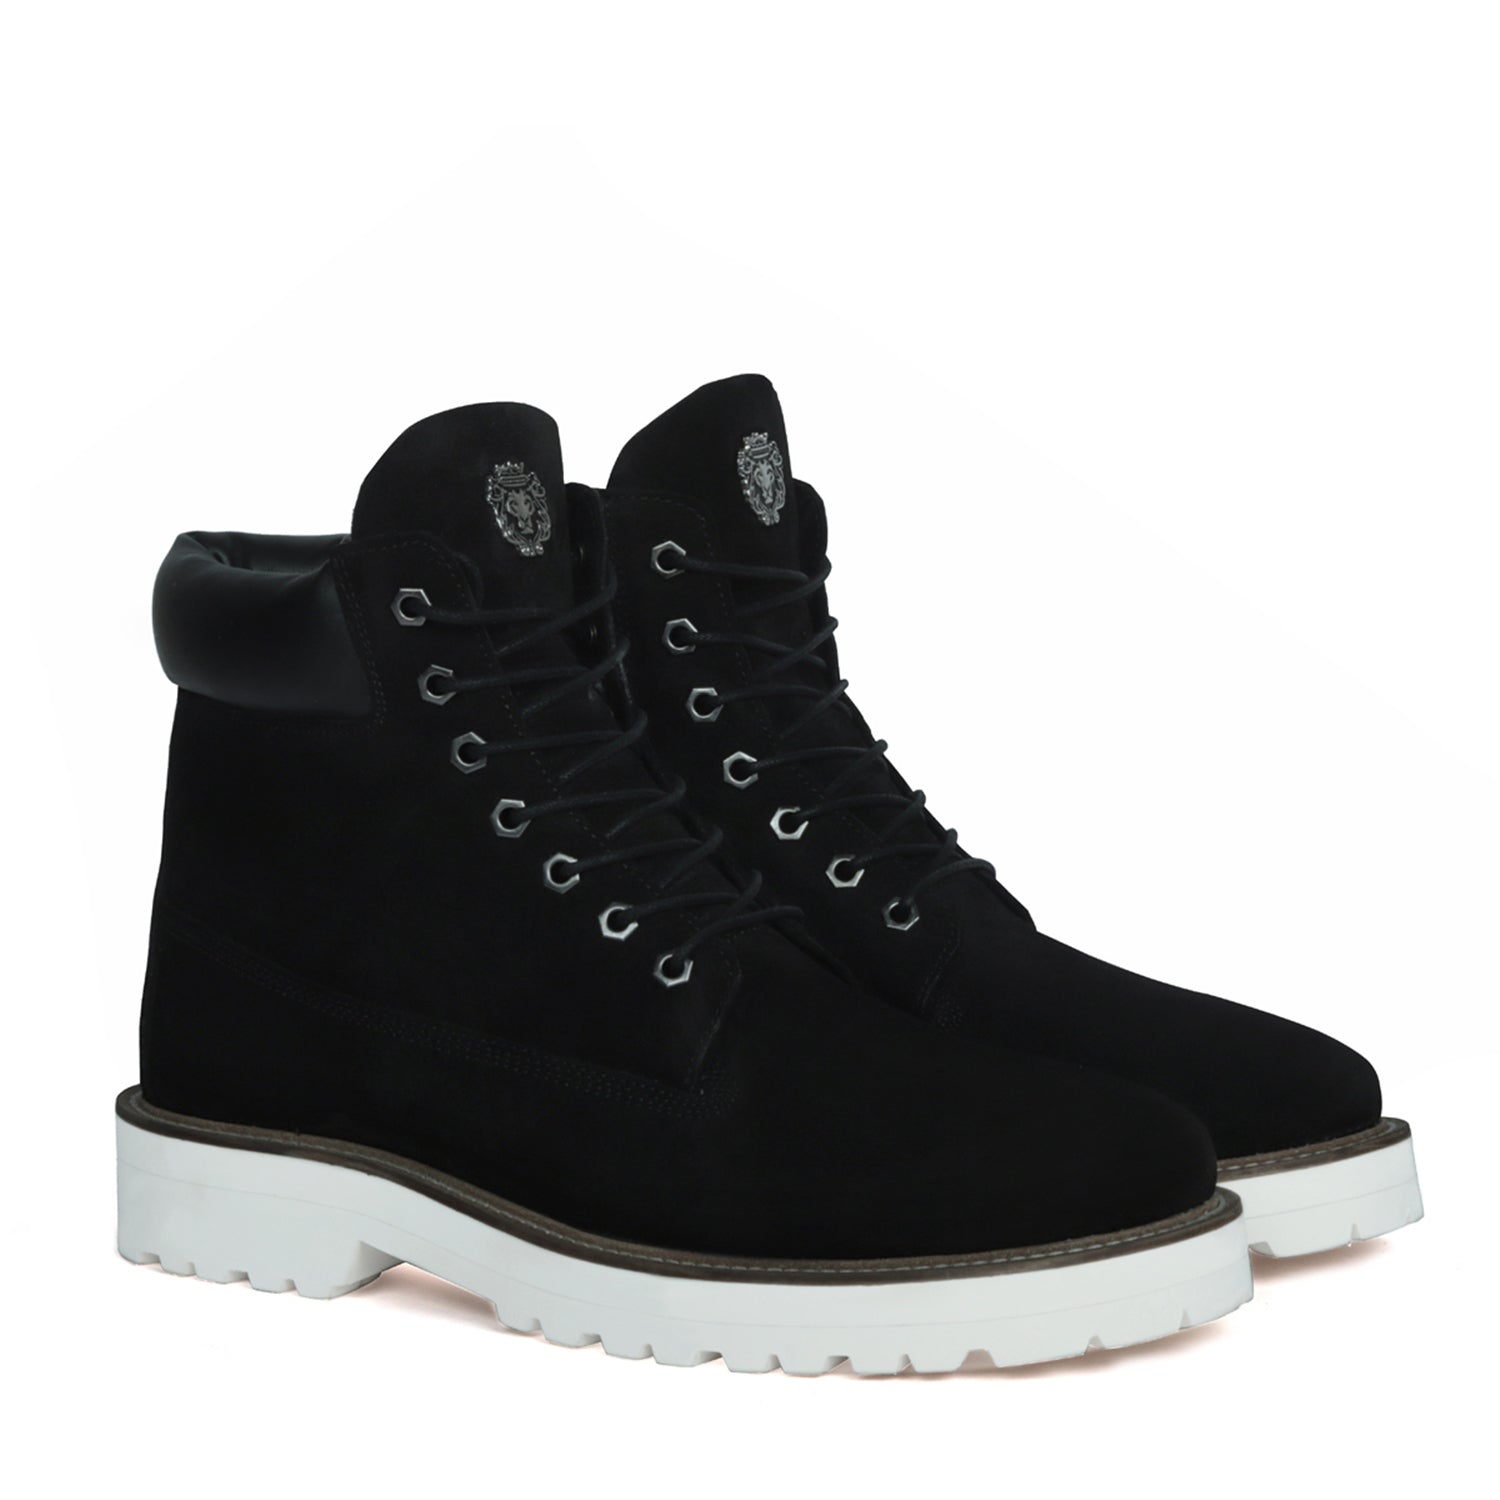 Light Weight Chunky Boot in Black Suede Leather with Lace-Up Closure White Sole By Brune & Bareskin